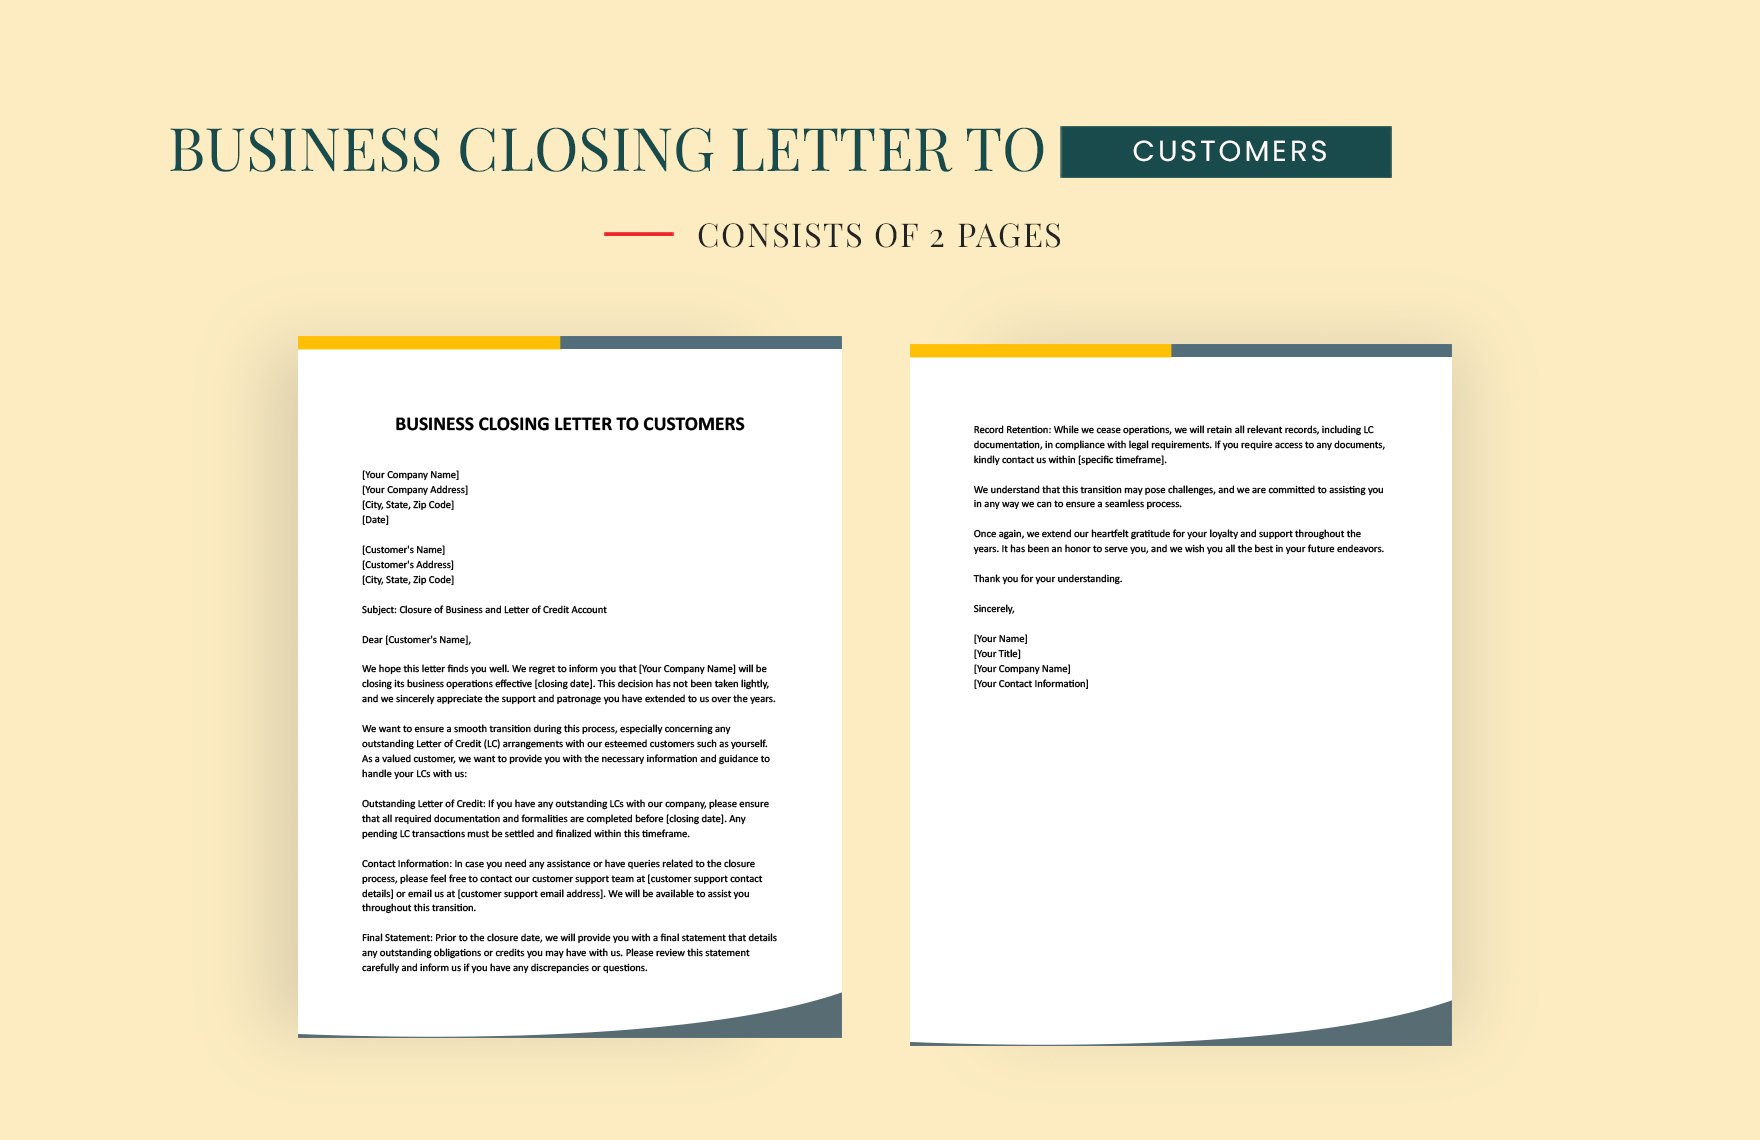 Business Closing Letter To Customers